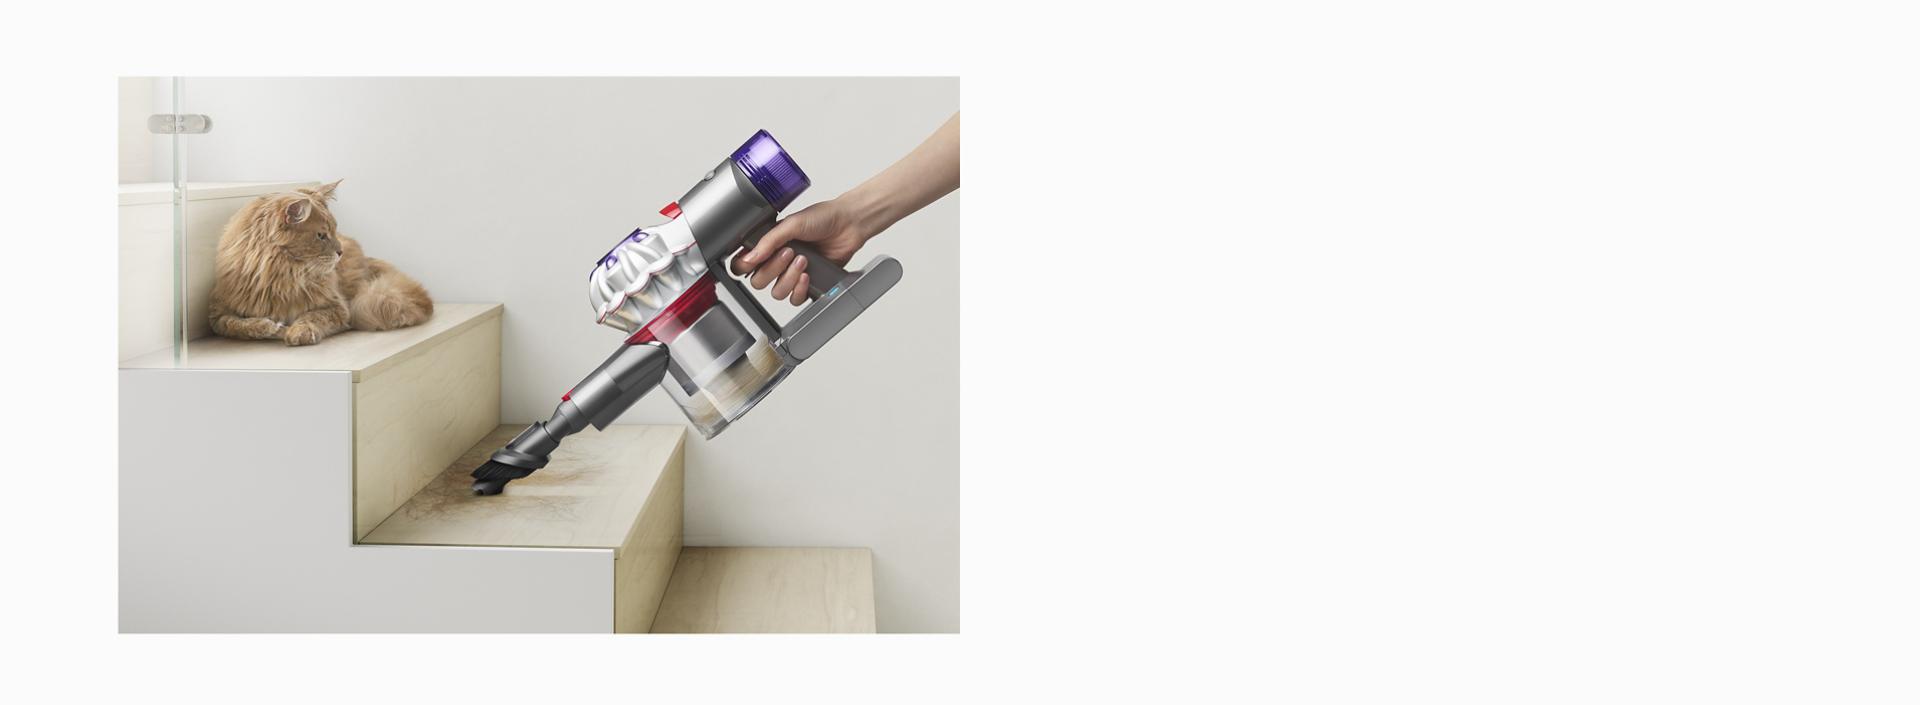 Dyson V7 Advanced vacuum being used as a handheld to clean stairs